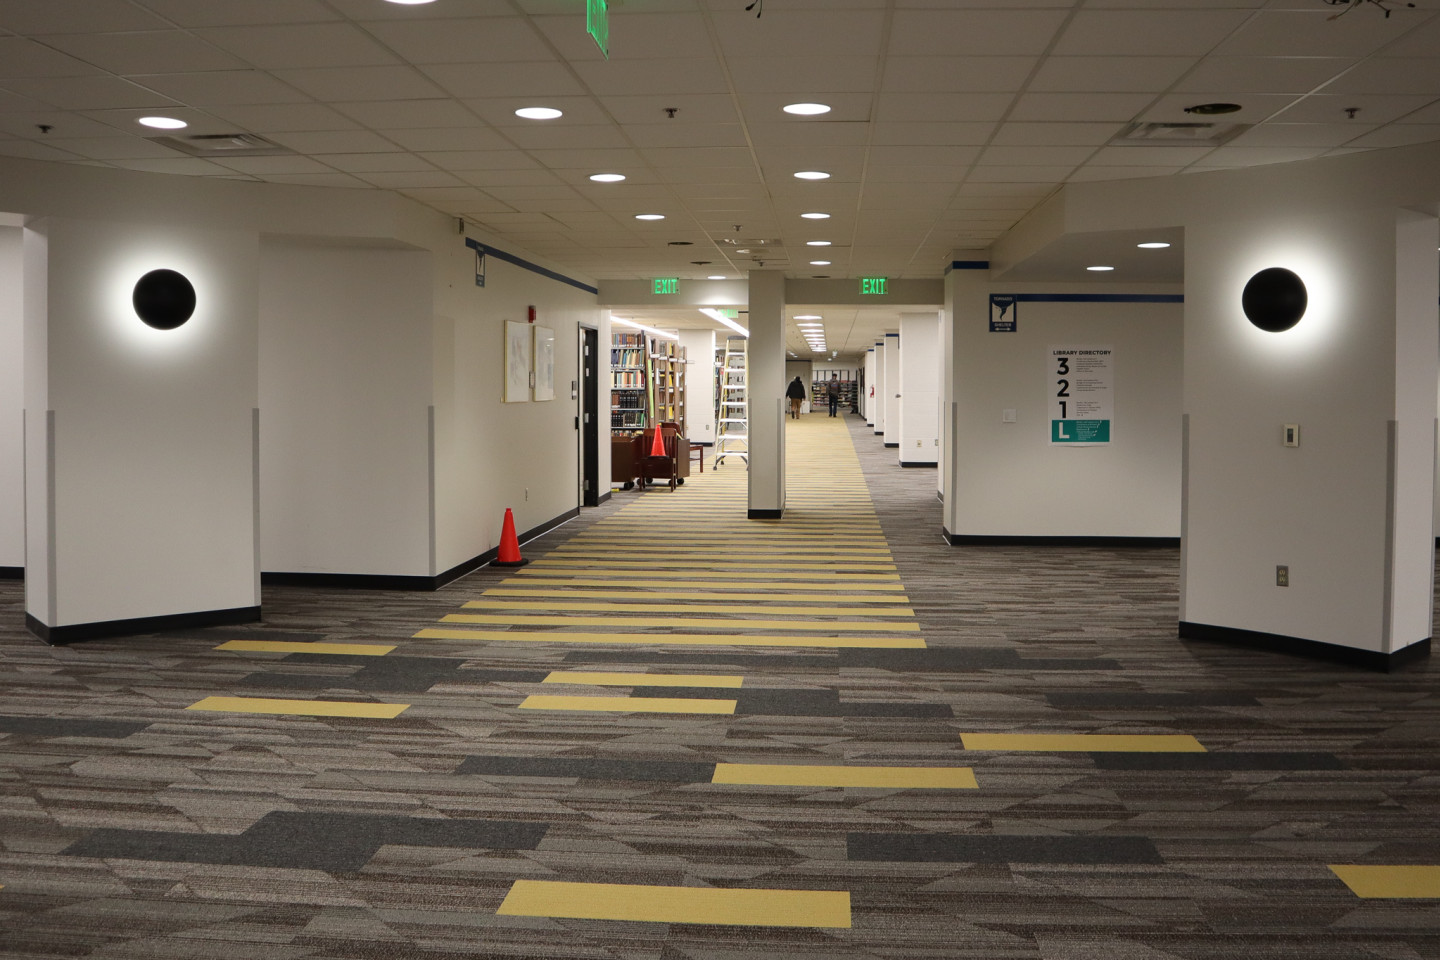 Waldo Library's lower level renovations include new carpet, energy-efficient lighting and a user-friendly layout.